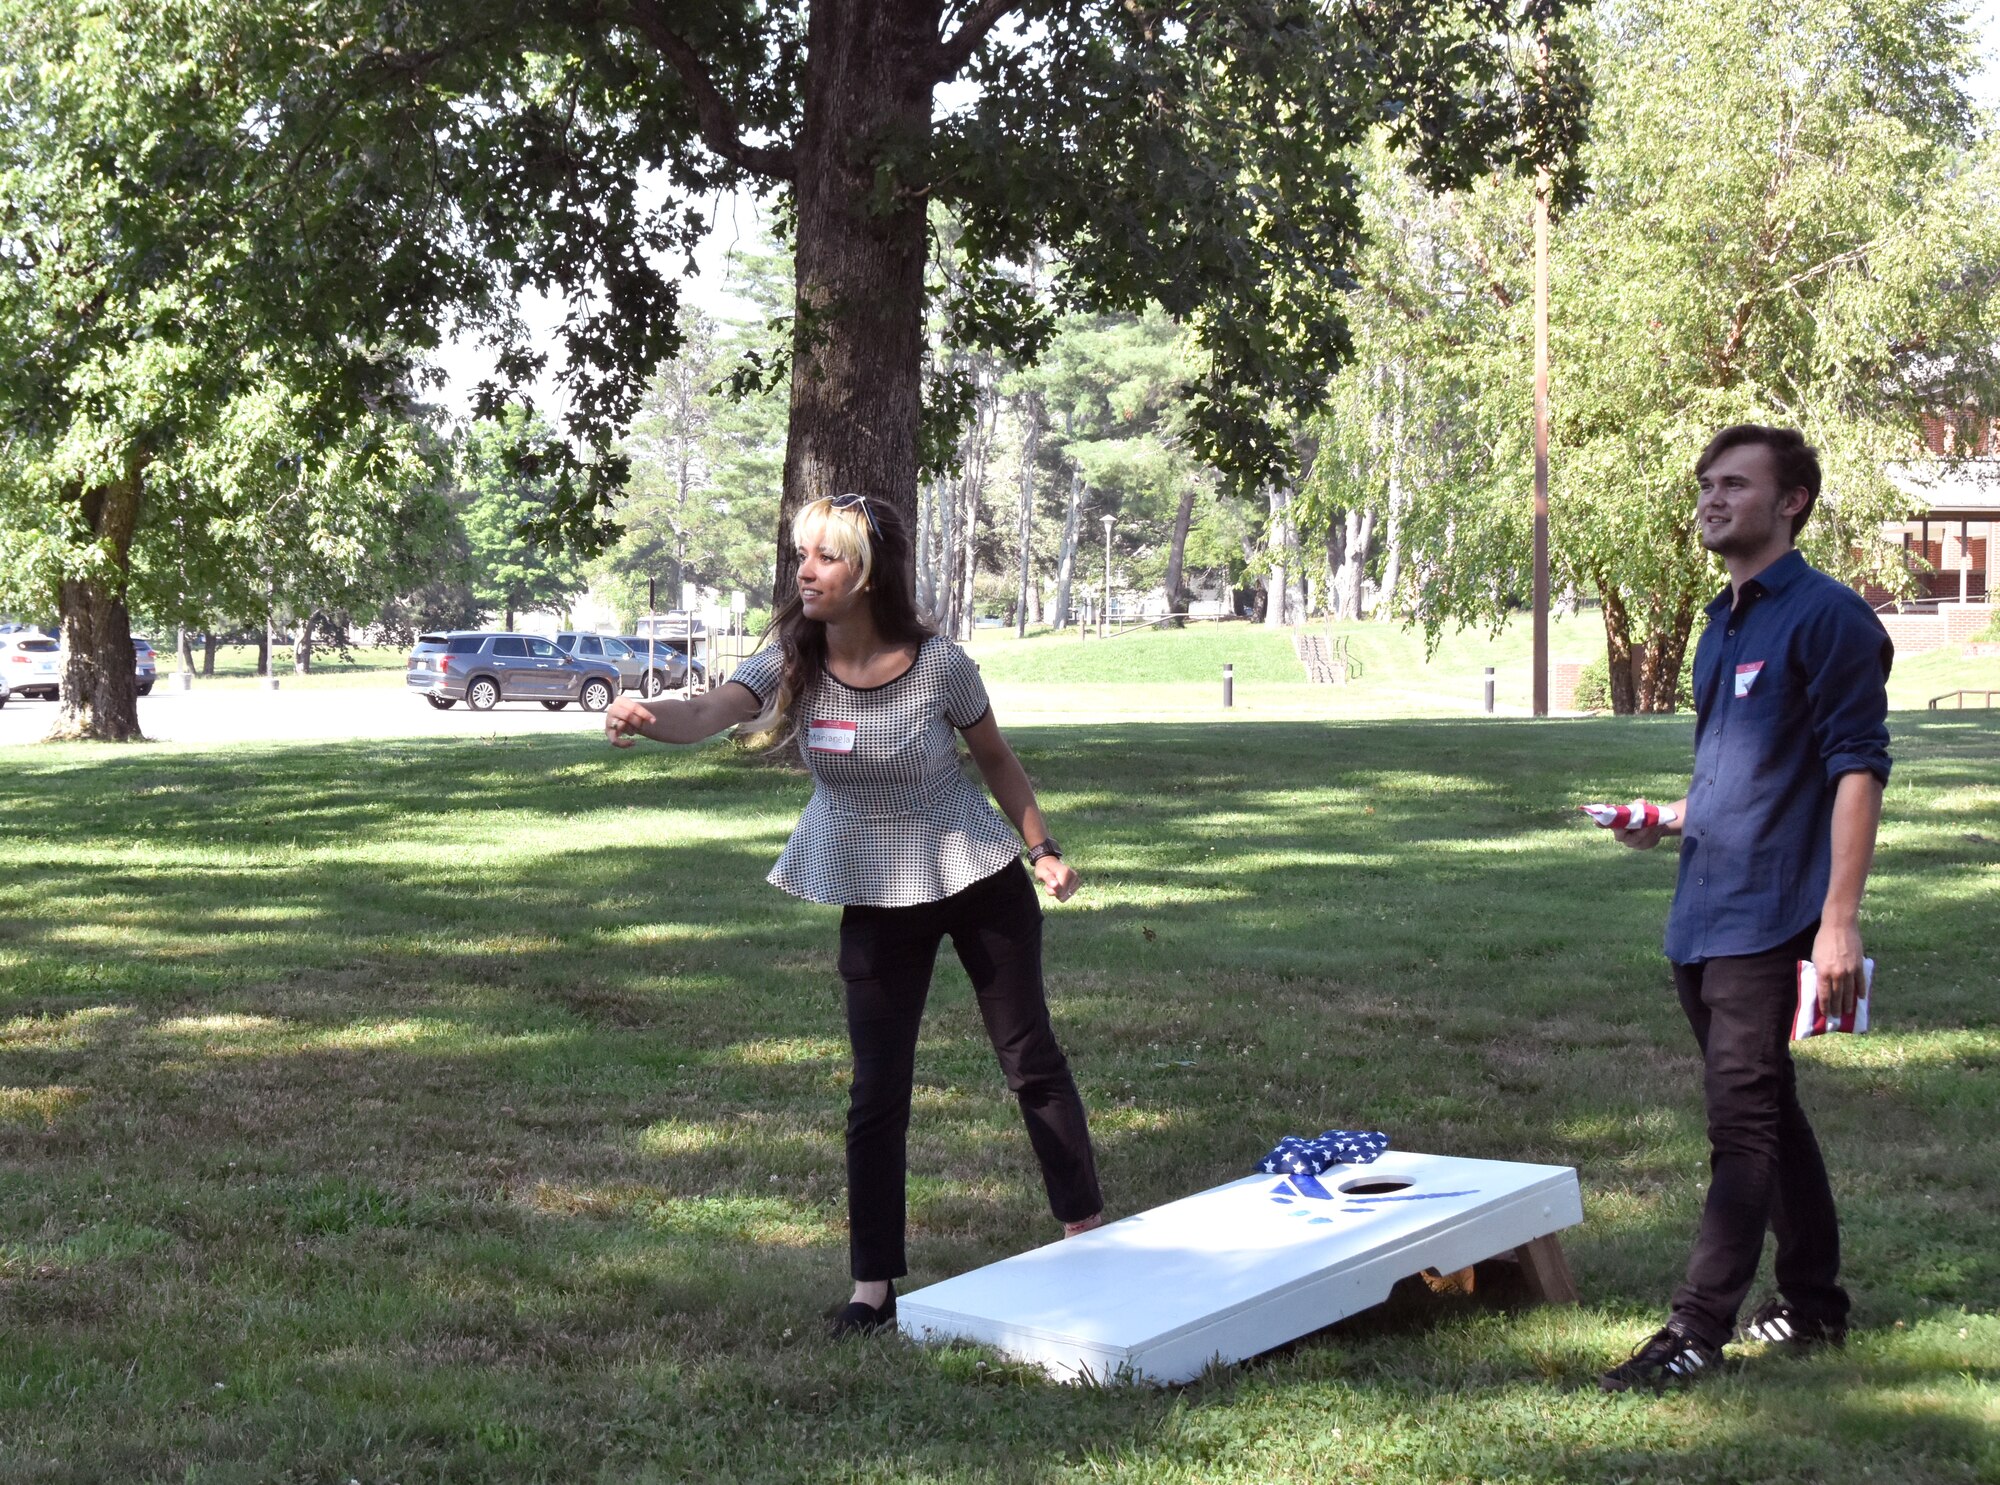 Marianela Cintron and Joe Kennedy, summer interns at Arnold Air Force Base, Tenn., play corn hole during a social event June 17, 2021, at the Arnold Lakeside Complex. For the second year, Department of Defense and contractor interns with National Aerospace Solutions, LLC, are joining together for their internship programs at Arnold. (U.S. Air Force photo by Bradley Hicks)